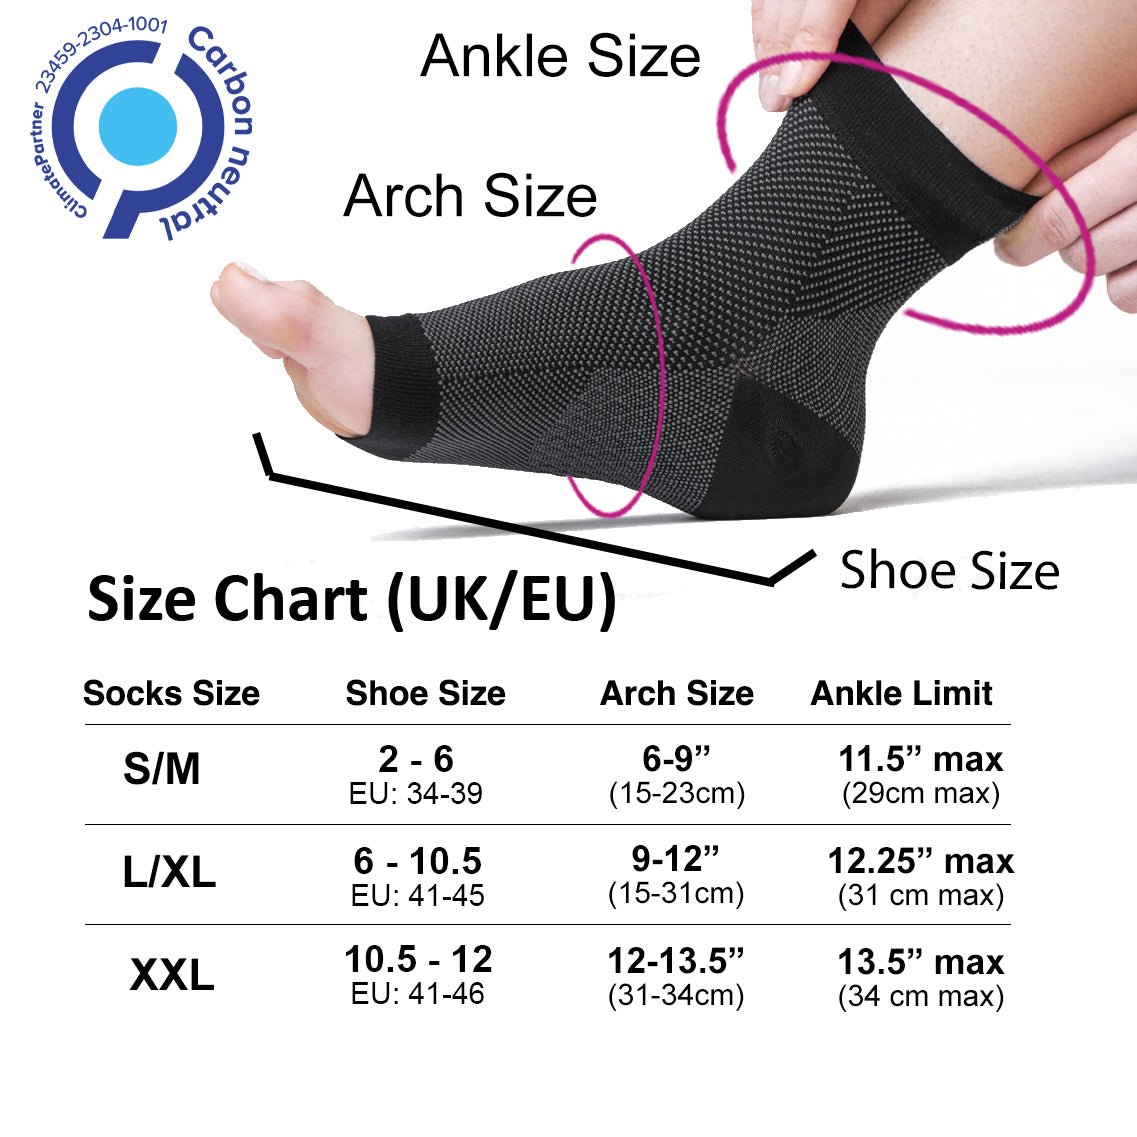 Ankle Support and Plantar Fasciitis Socks (2 Pairs) - aZengear